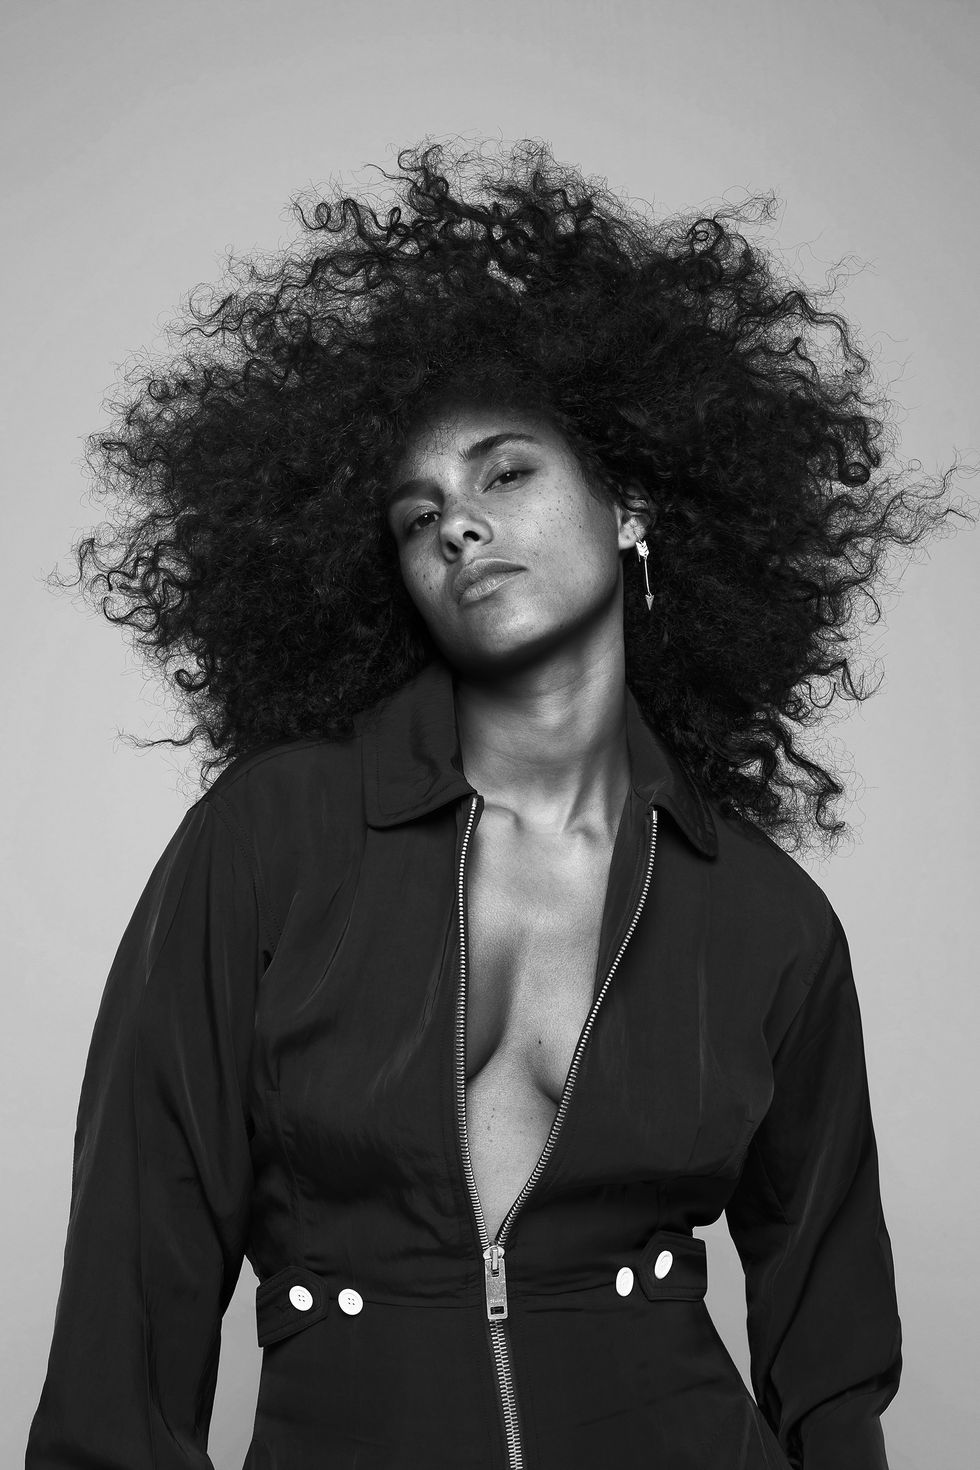 Alicia Keys Talks The Voice, Activism and Music - Alicia Keys Interview